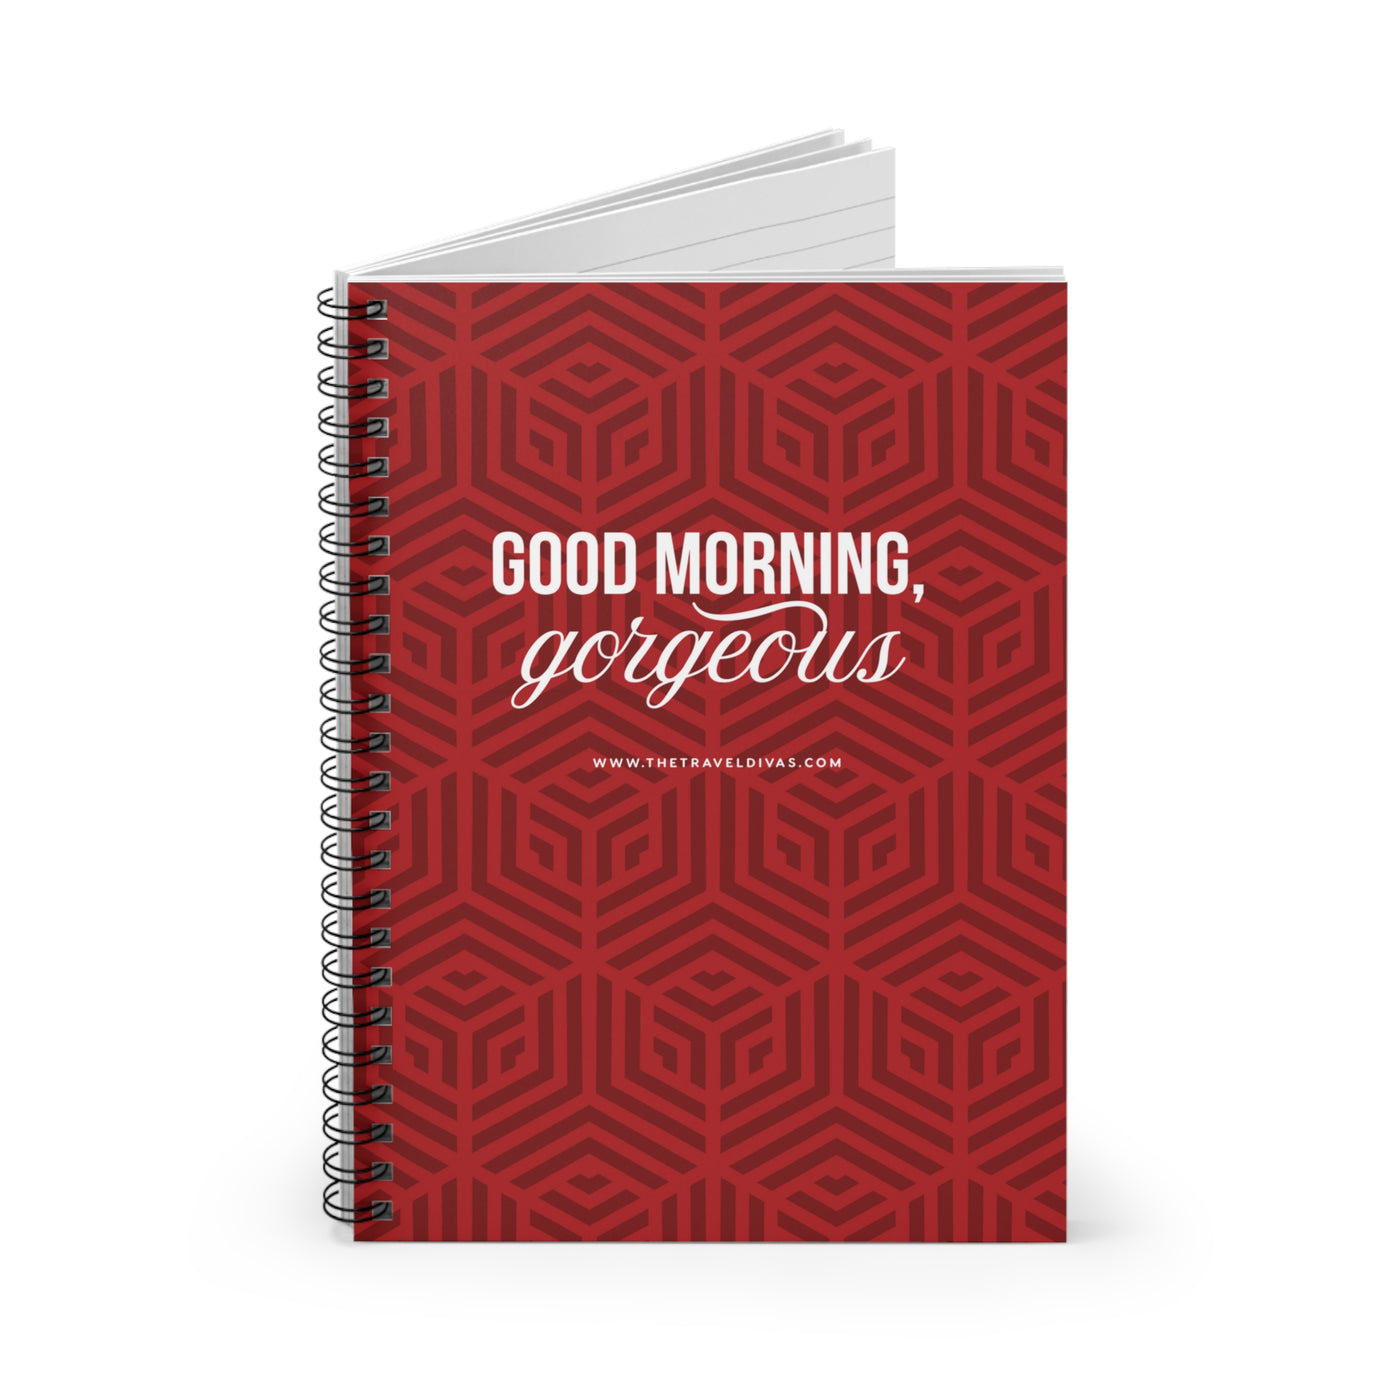 Good morning Gorgeous Spiral Notebook - Ruled Line